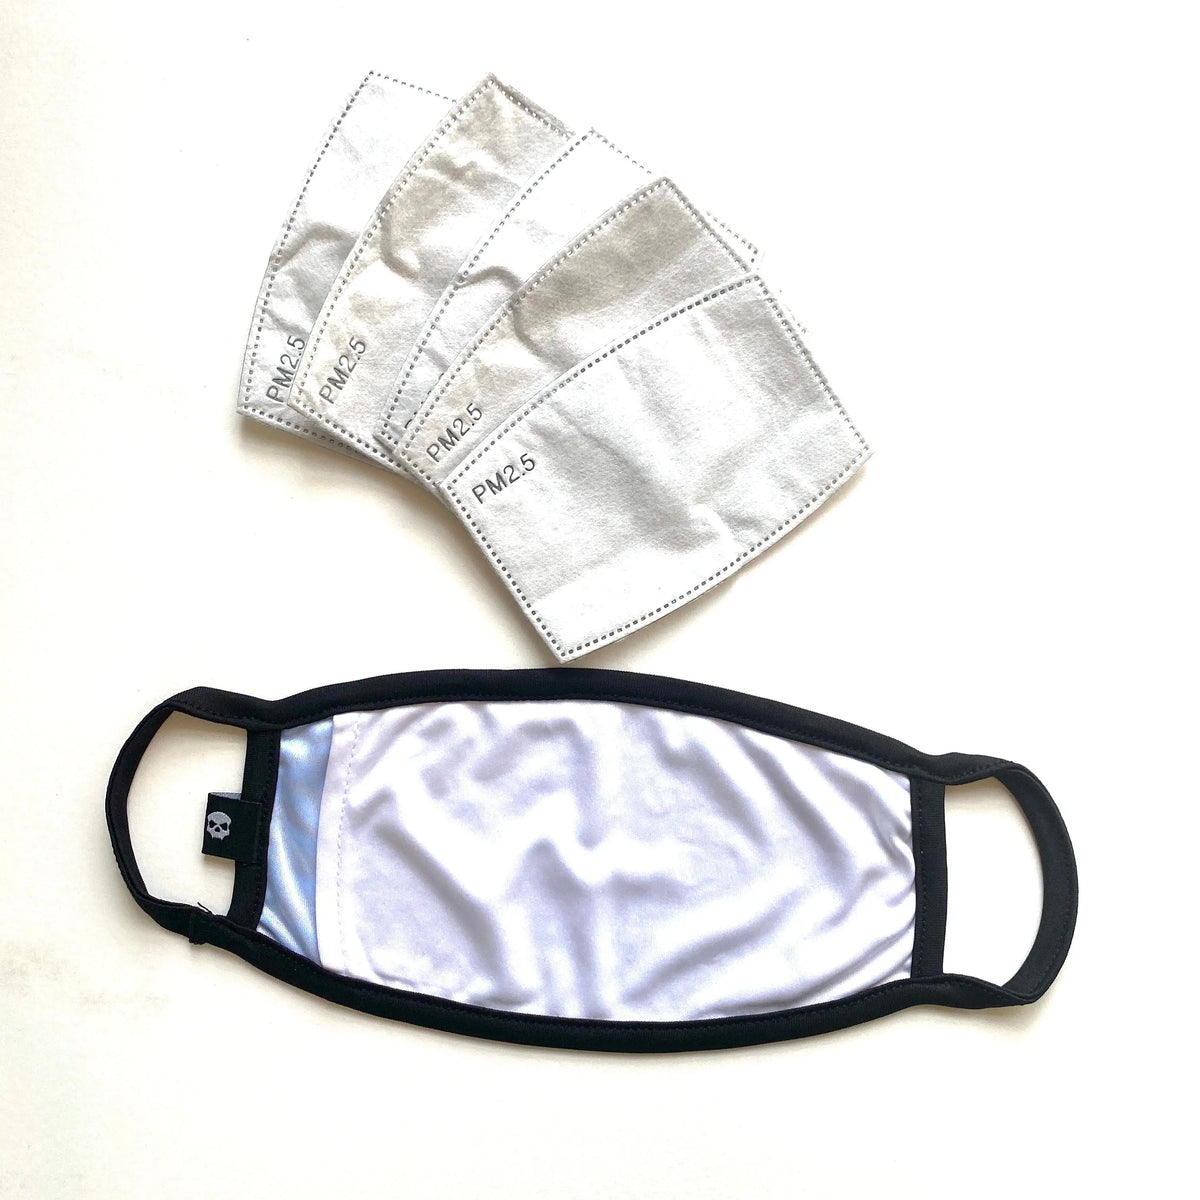 Filter Face Mask INPAT (includes 5 PM2.5 filters)